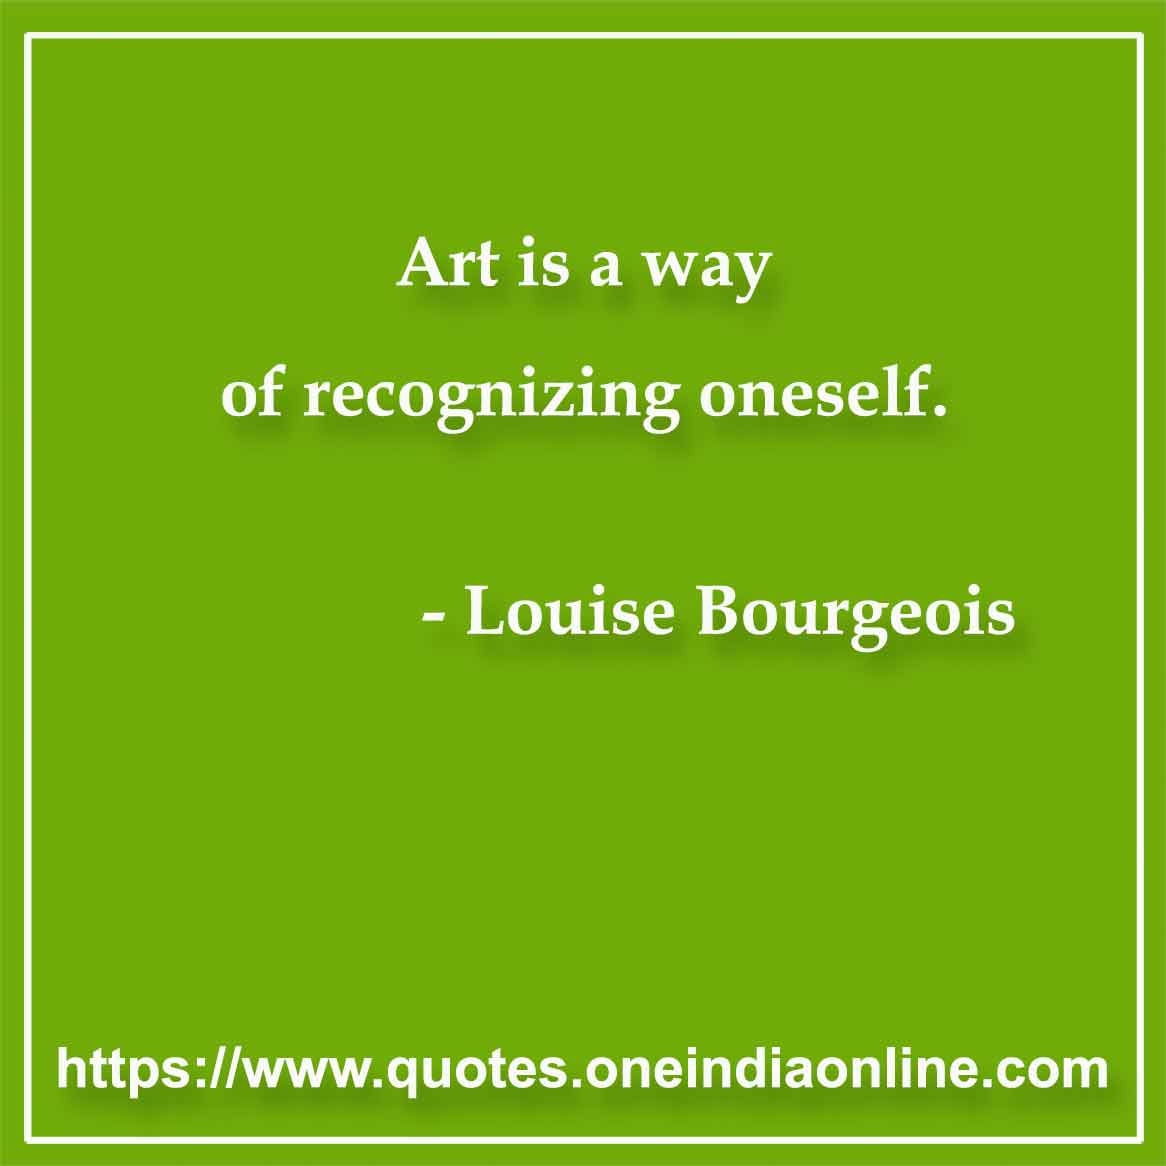 famous art quotes by louise bourgeois